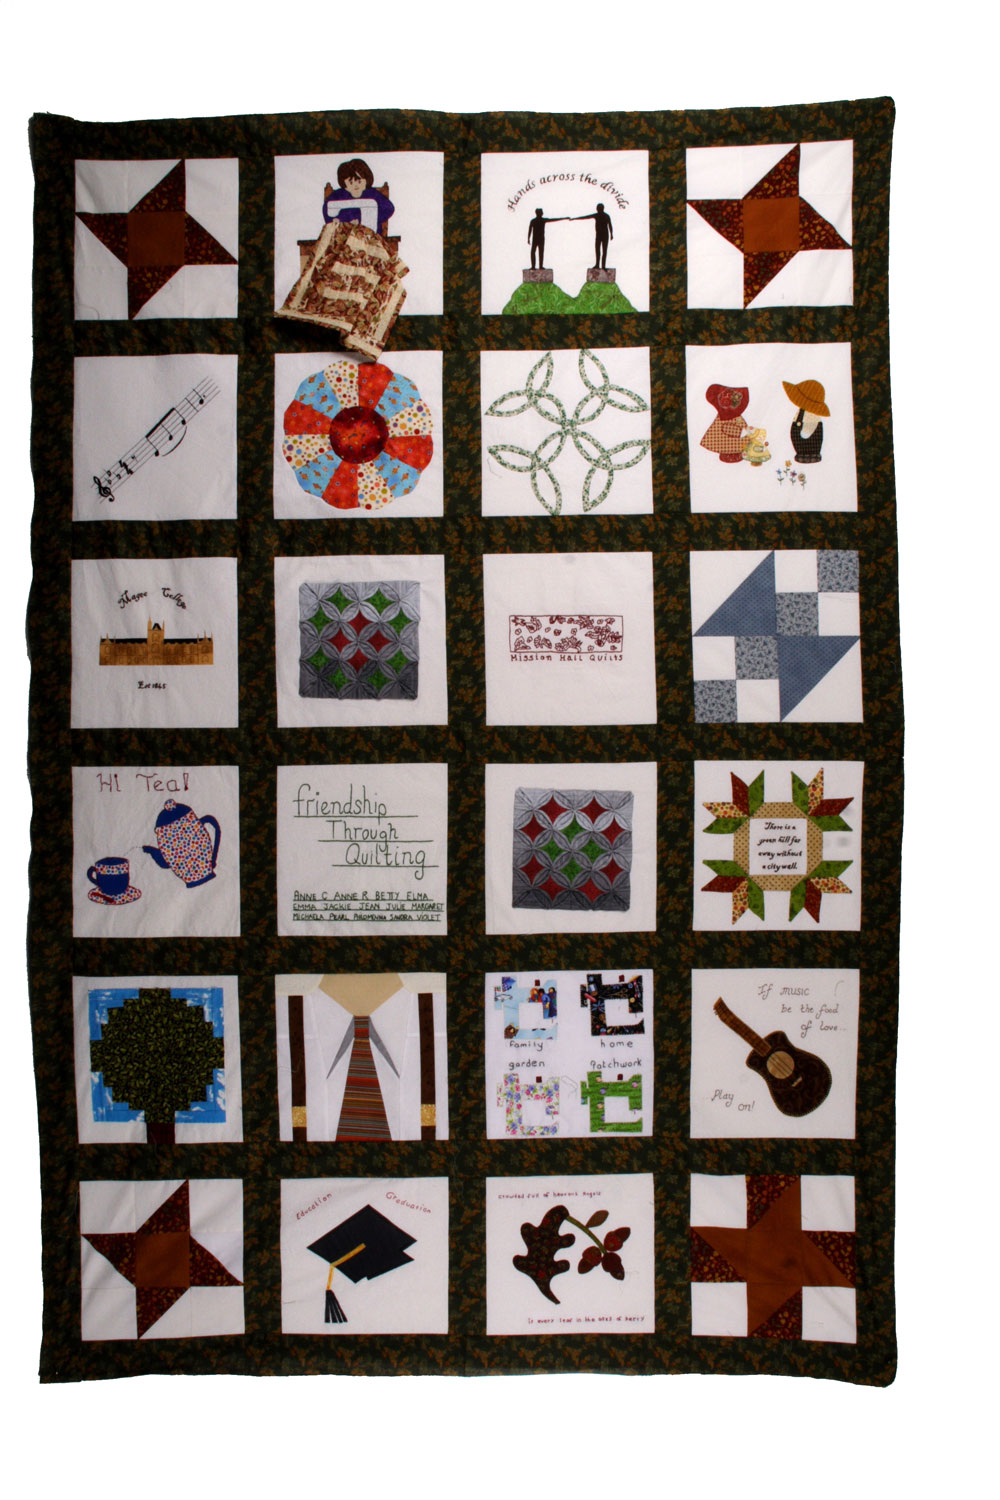 'Friendship through Quilting', by Mission Hall Quilters, Derry/Londonderry. (Photo: Colin Peck)